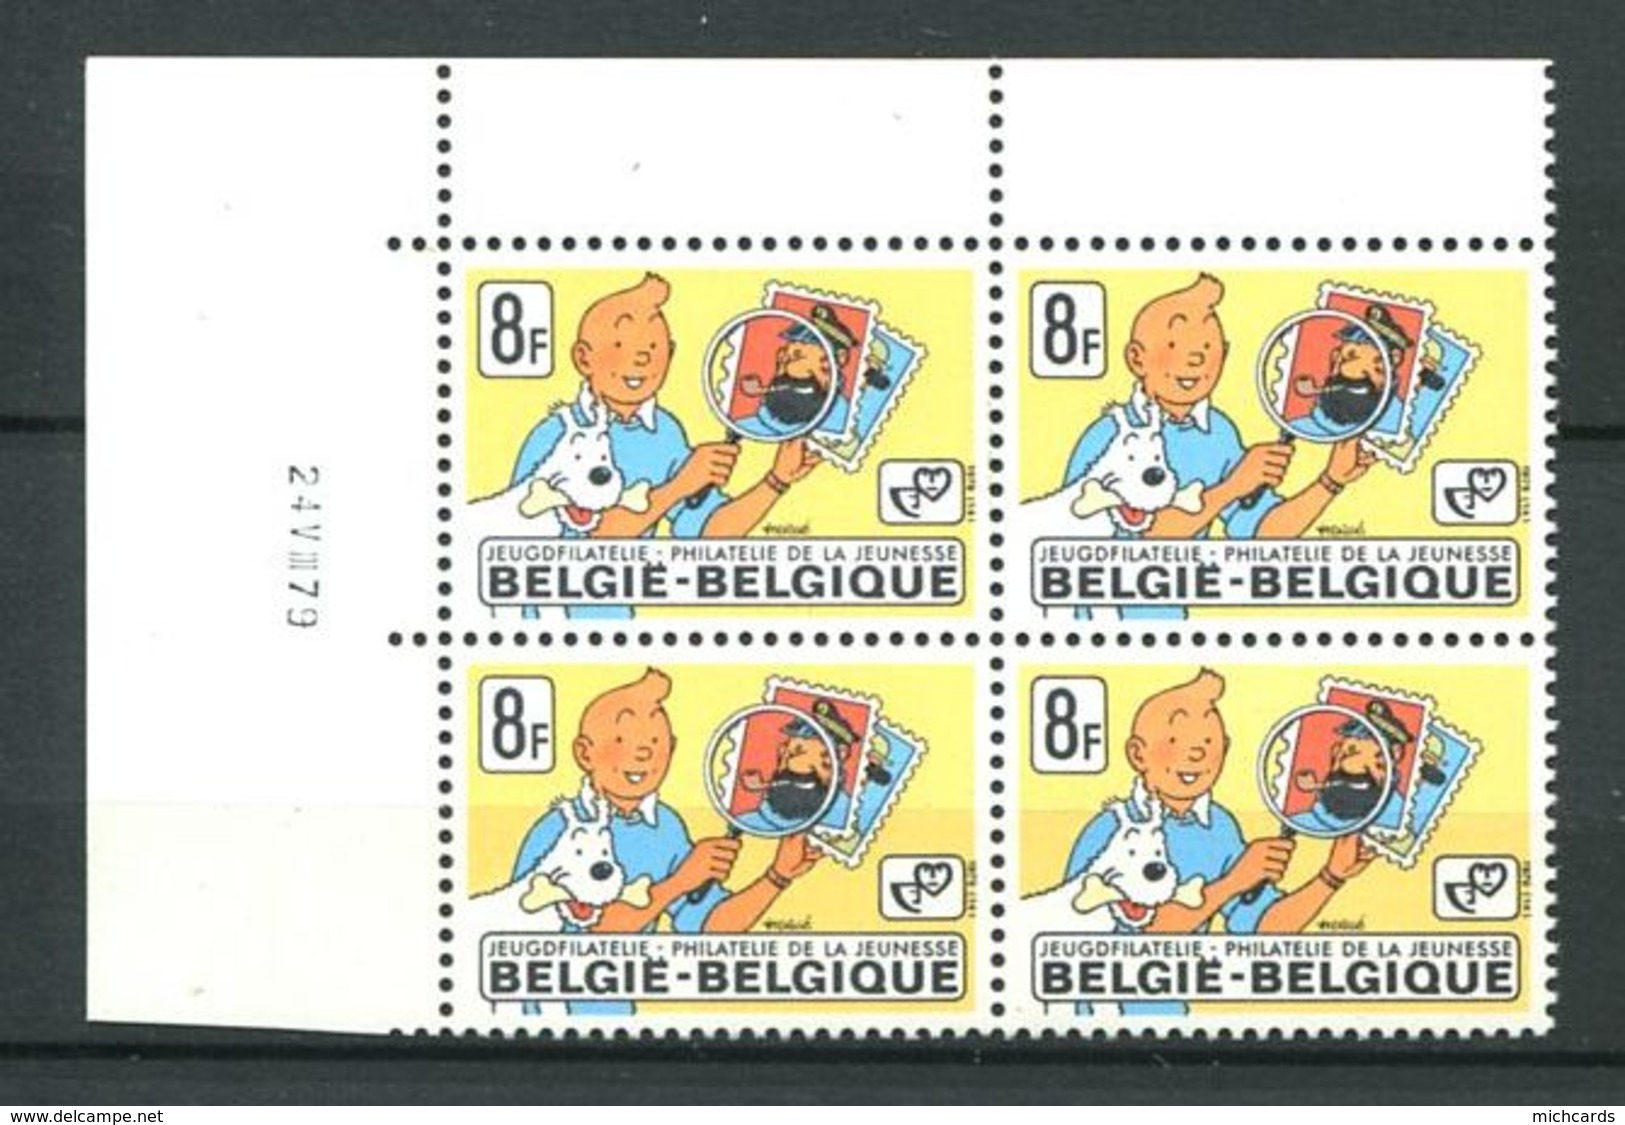 104 BELGIQUE 1979 - Yvert 1939 X 4 Coin Date - Tintin Jeunesse Loupe Timbre - Neuf ** (MNH) Sans Trace De Charniere - Unused Stamps